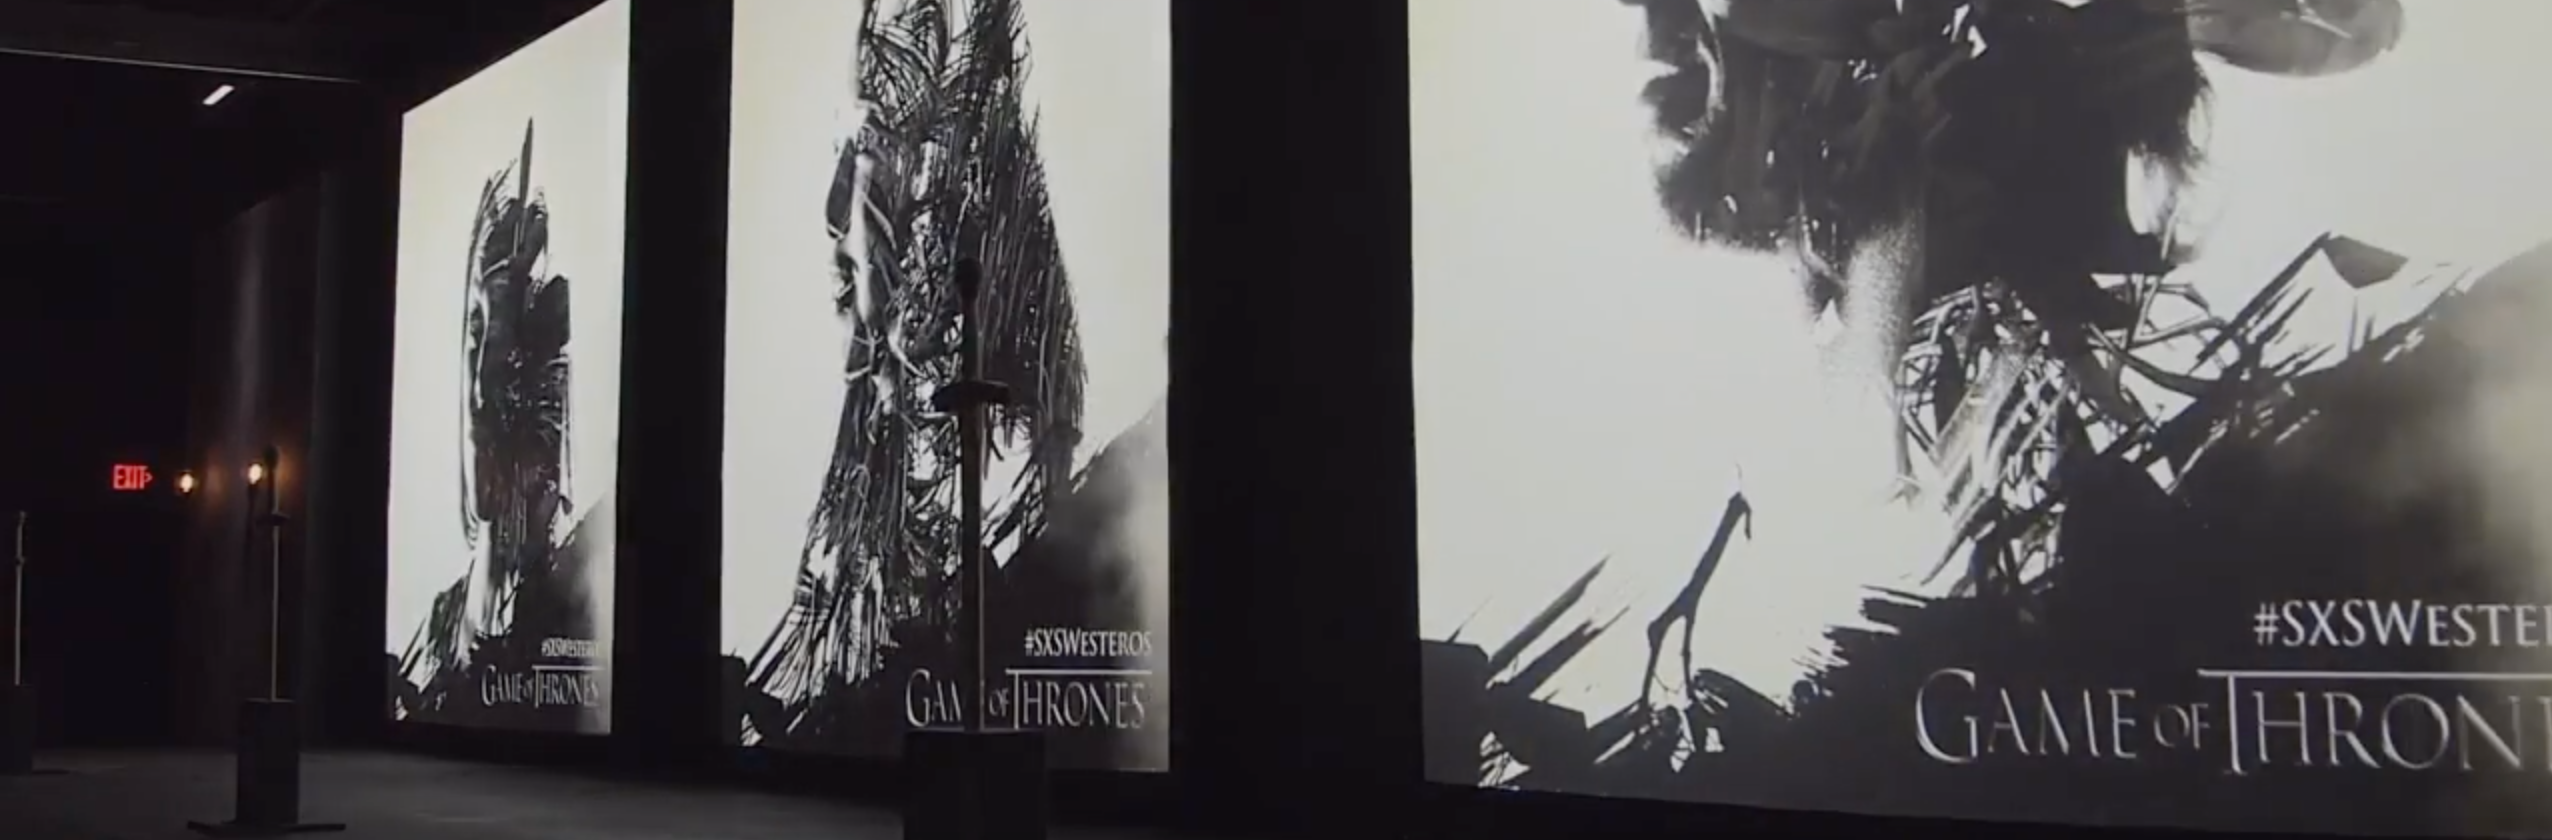 Three-screen projection display at Game of Thrones activation at SXSW